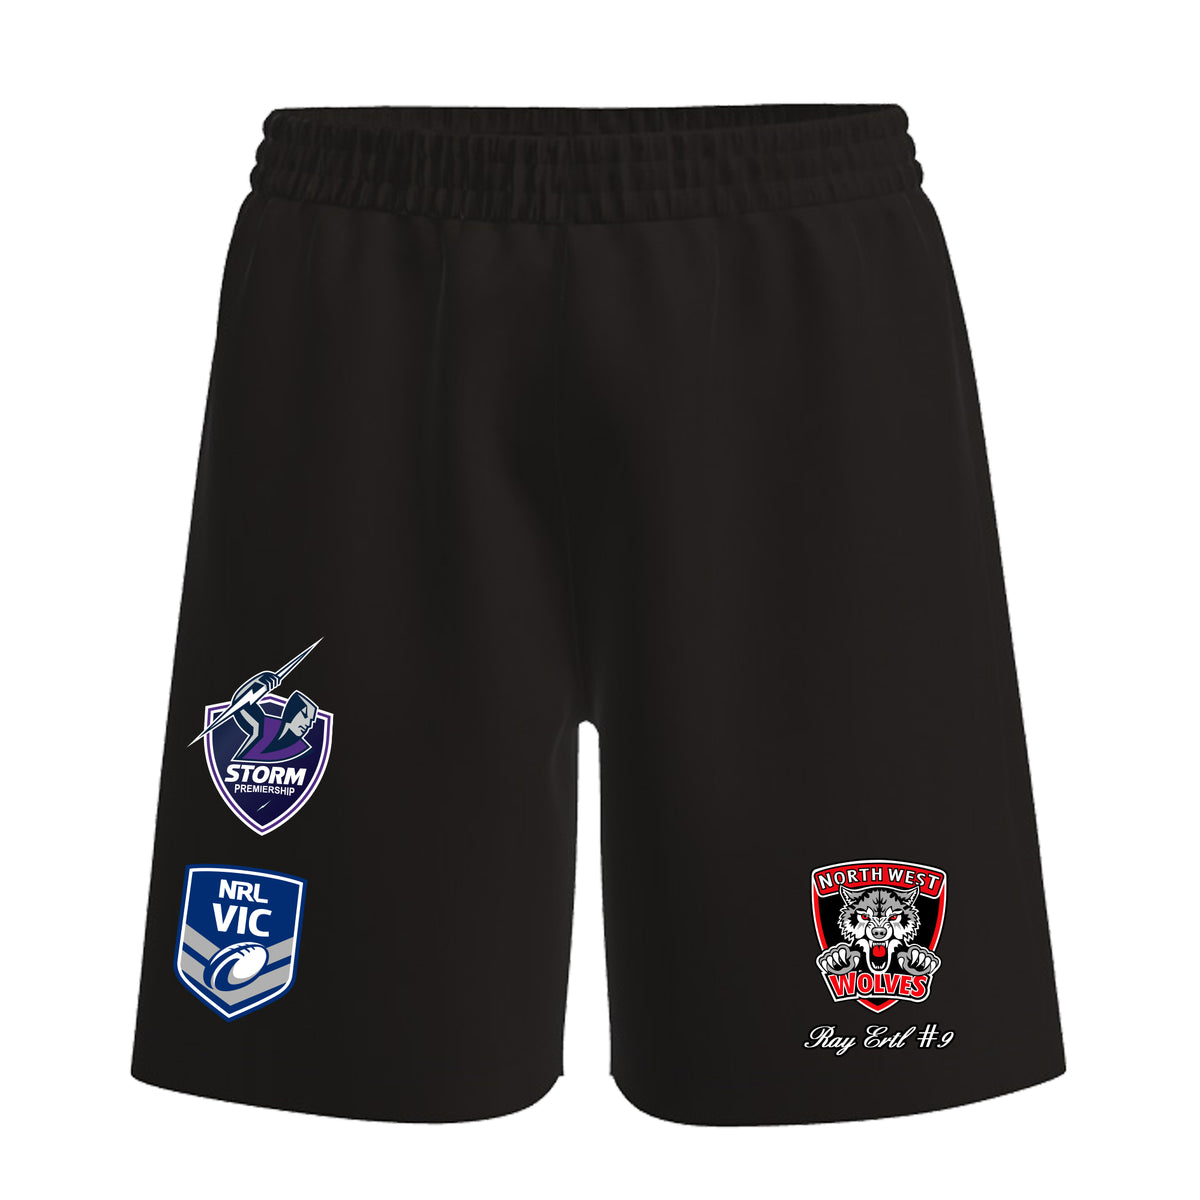 NORTH WEST WOLVES - RUNNING SHORTS